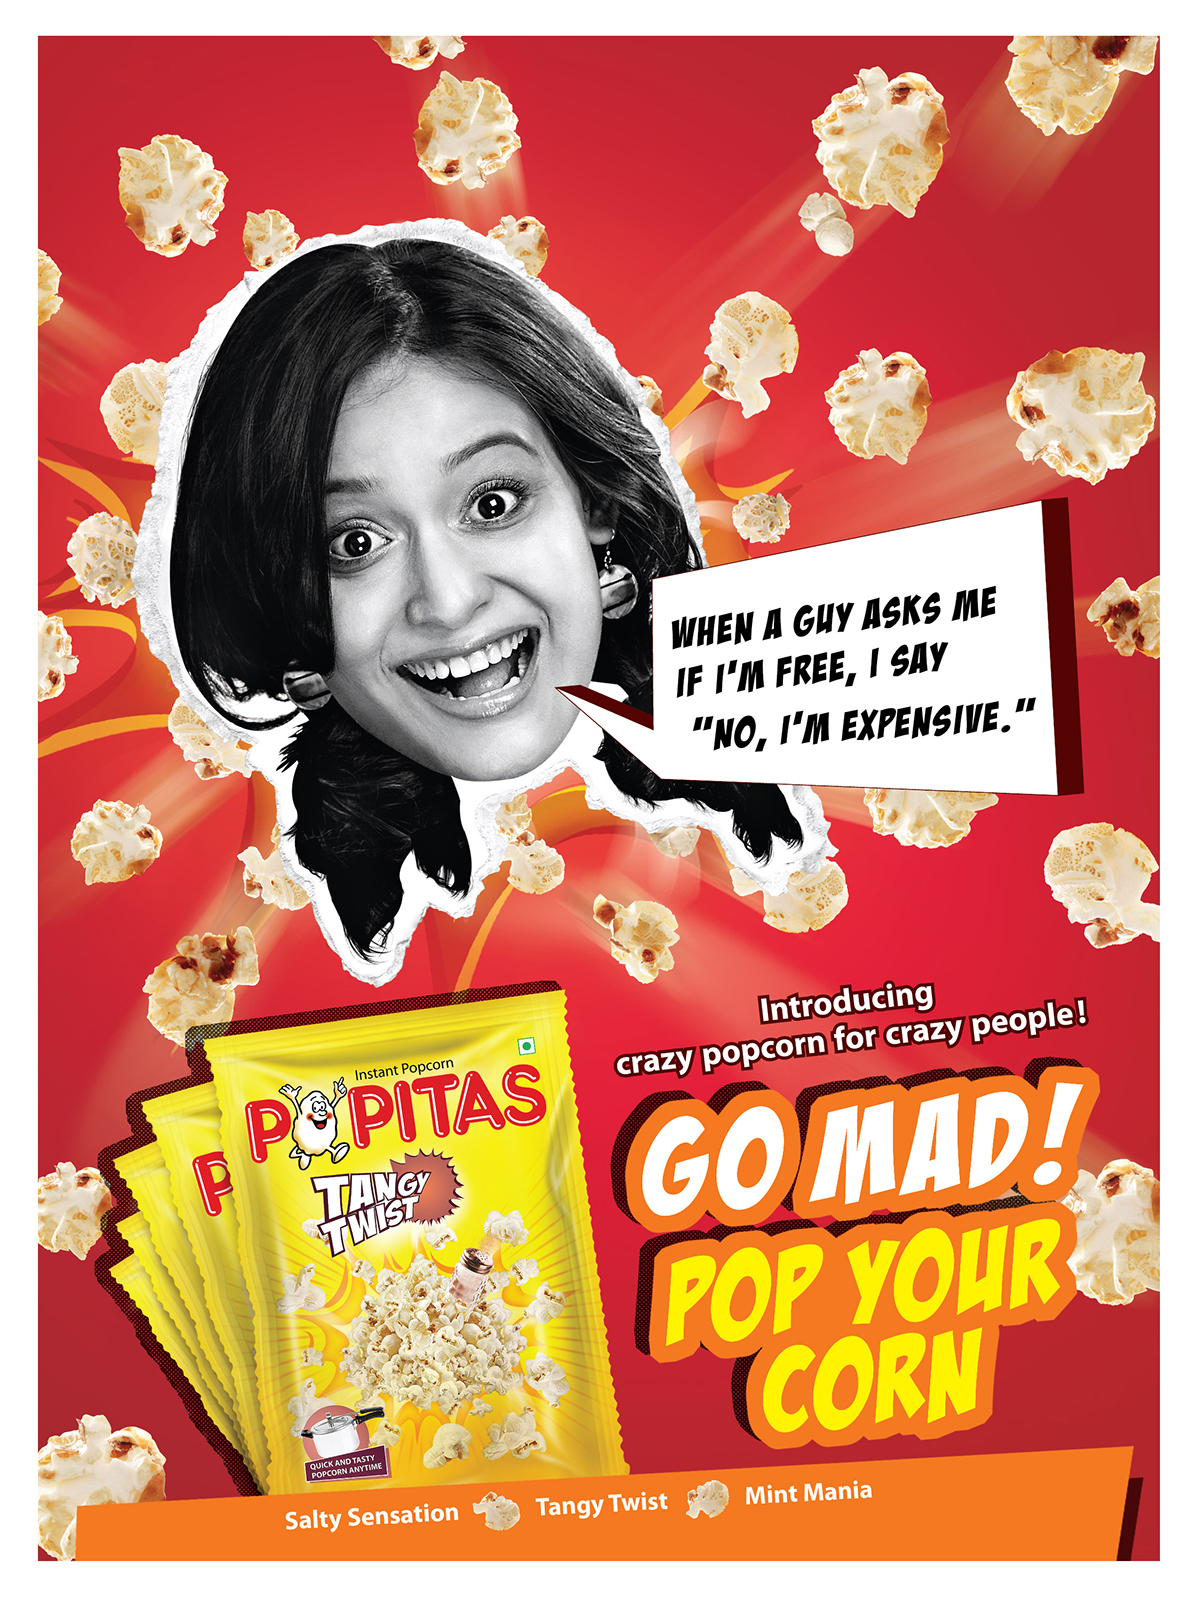 poster popcorn Italy Borges corns Mad tasty salty tangy Popitas